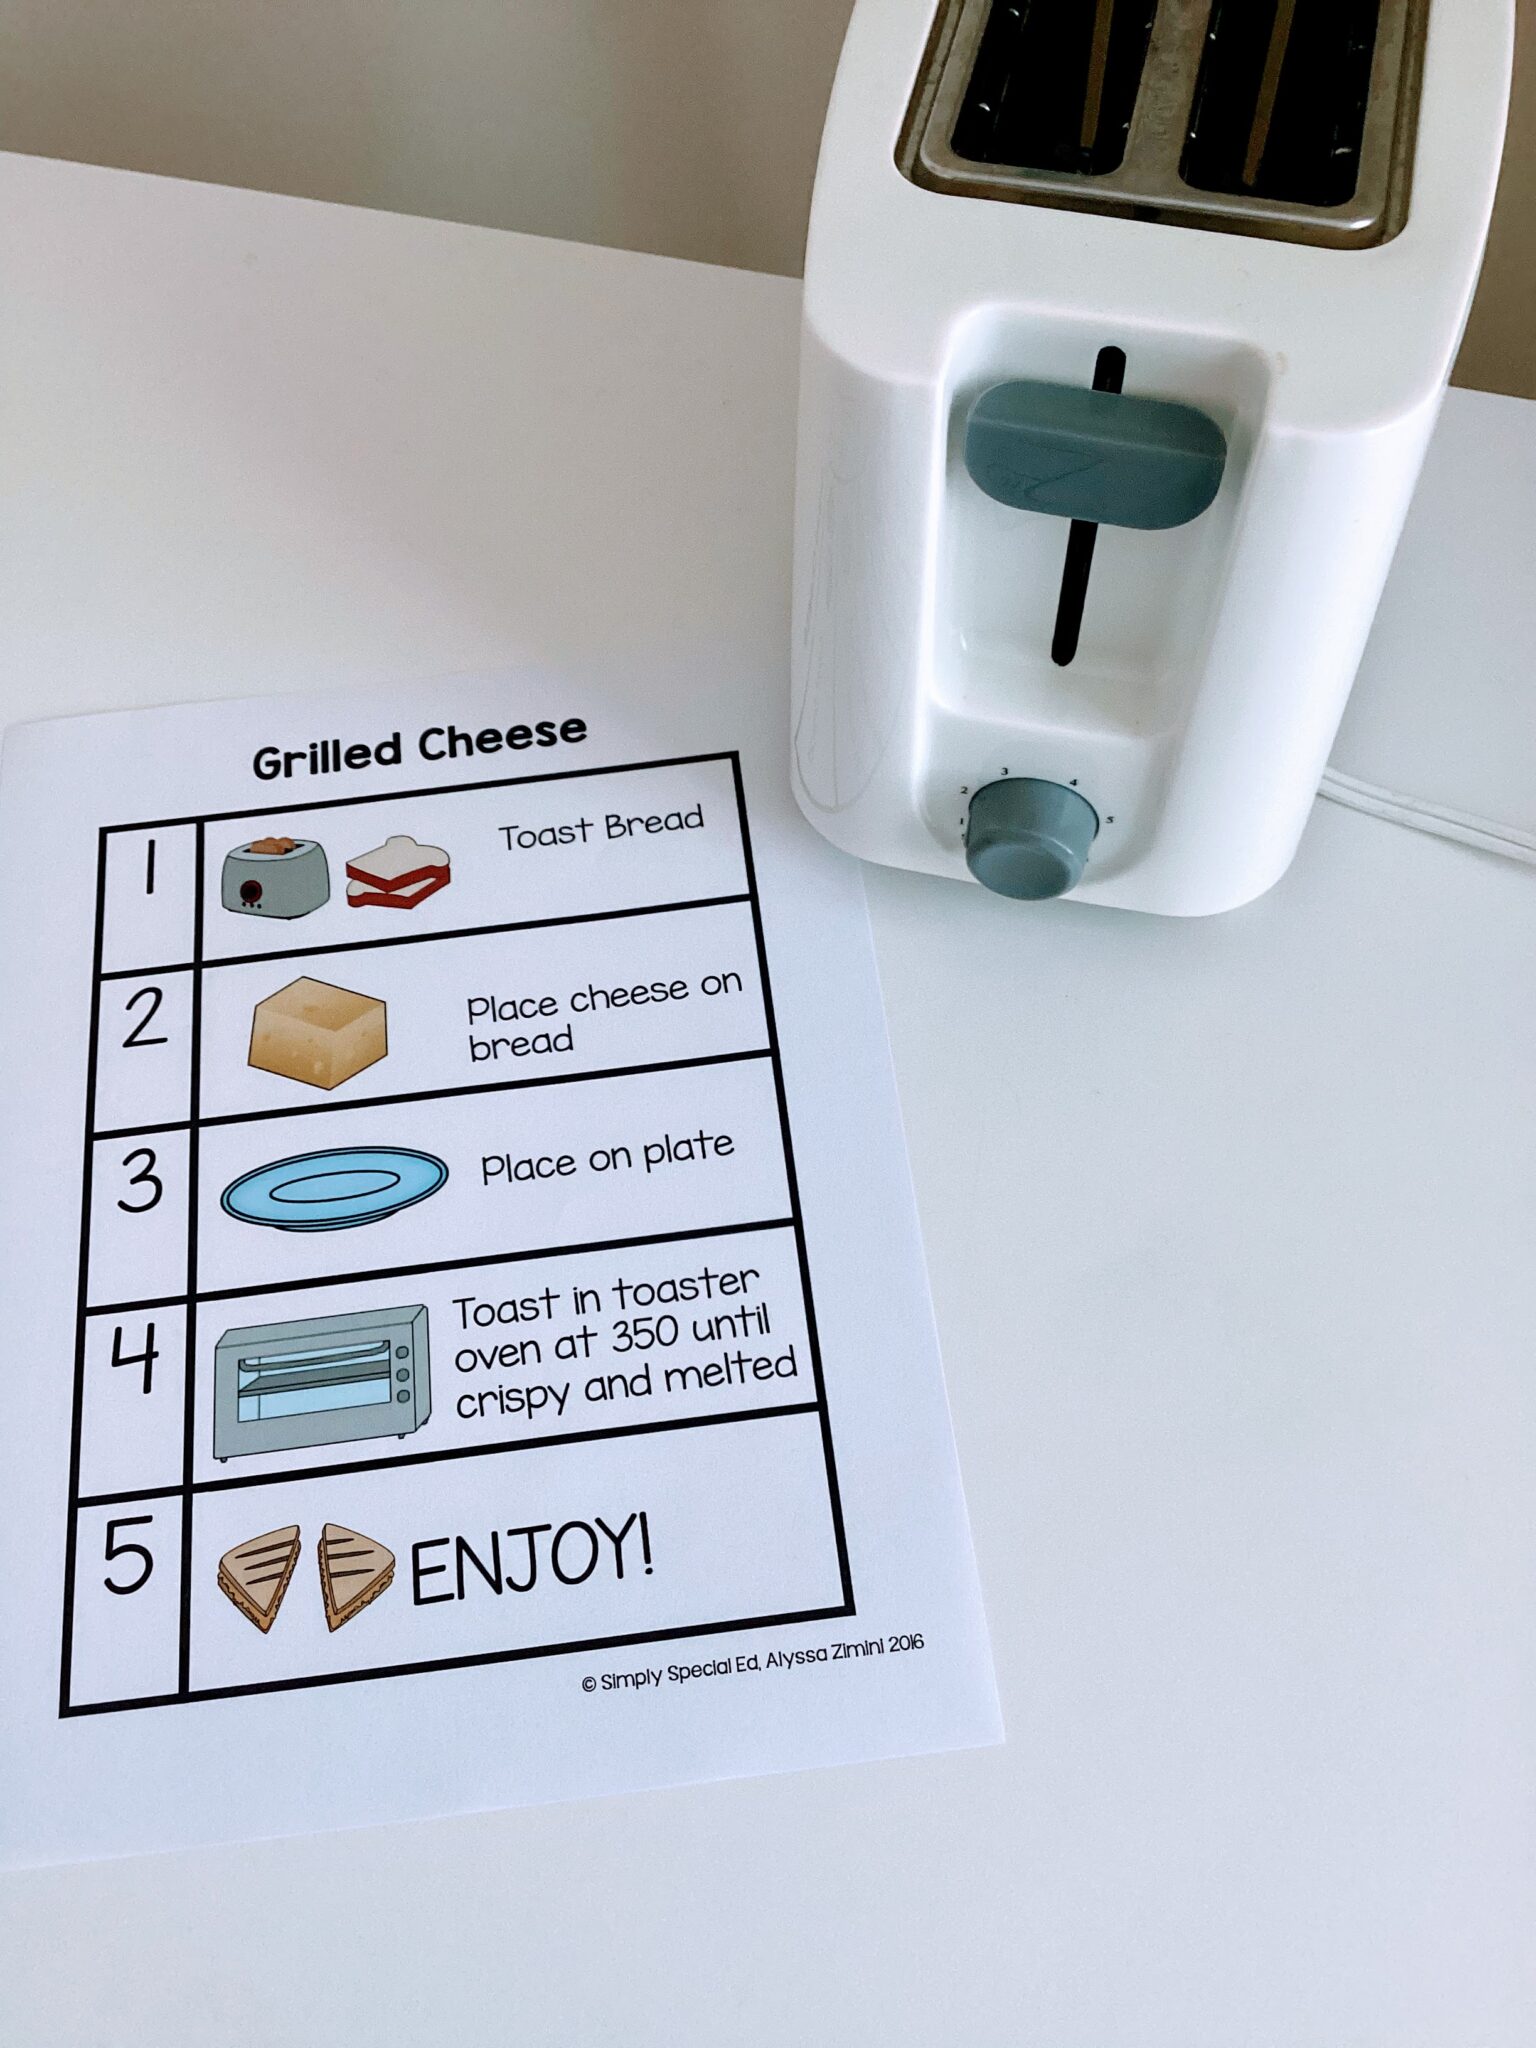 the grilled cheese recipe next to a toaster